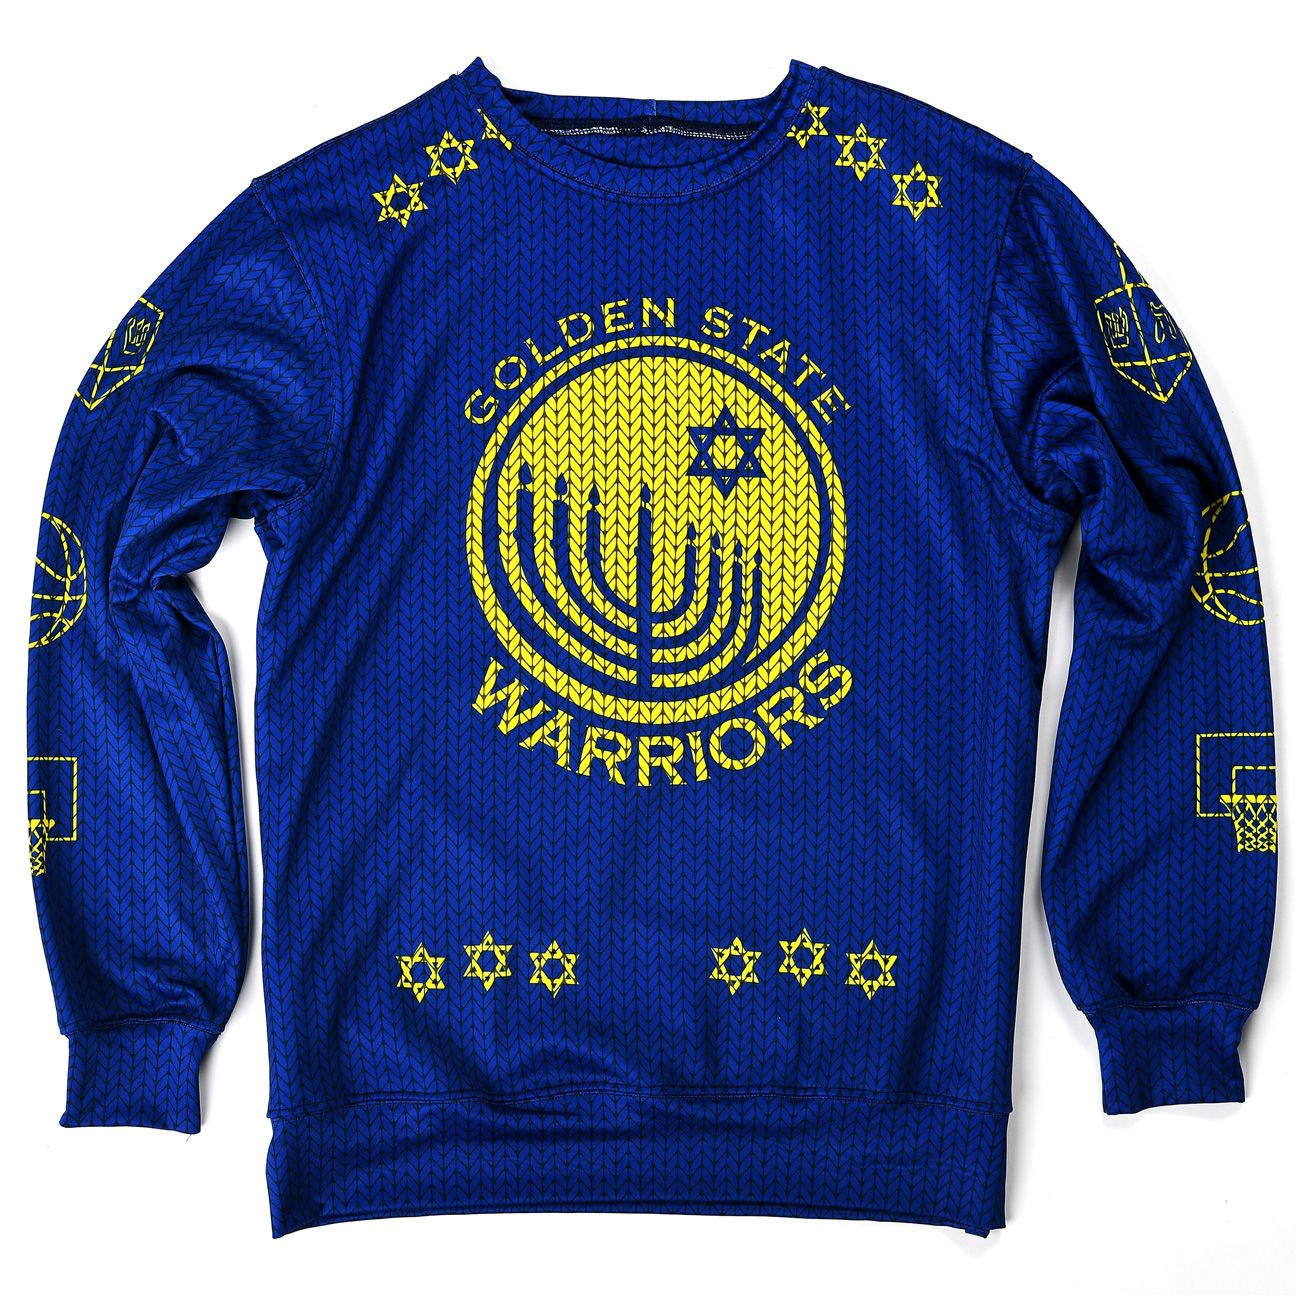 Warriors ugly sweater